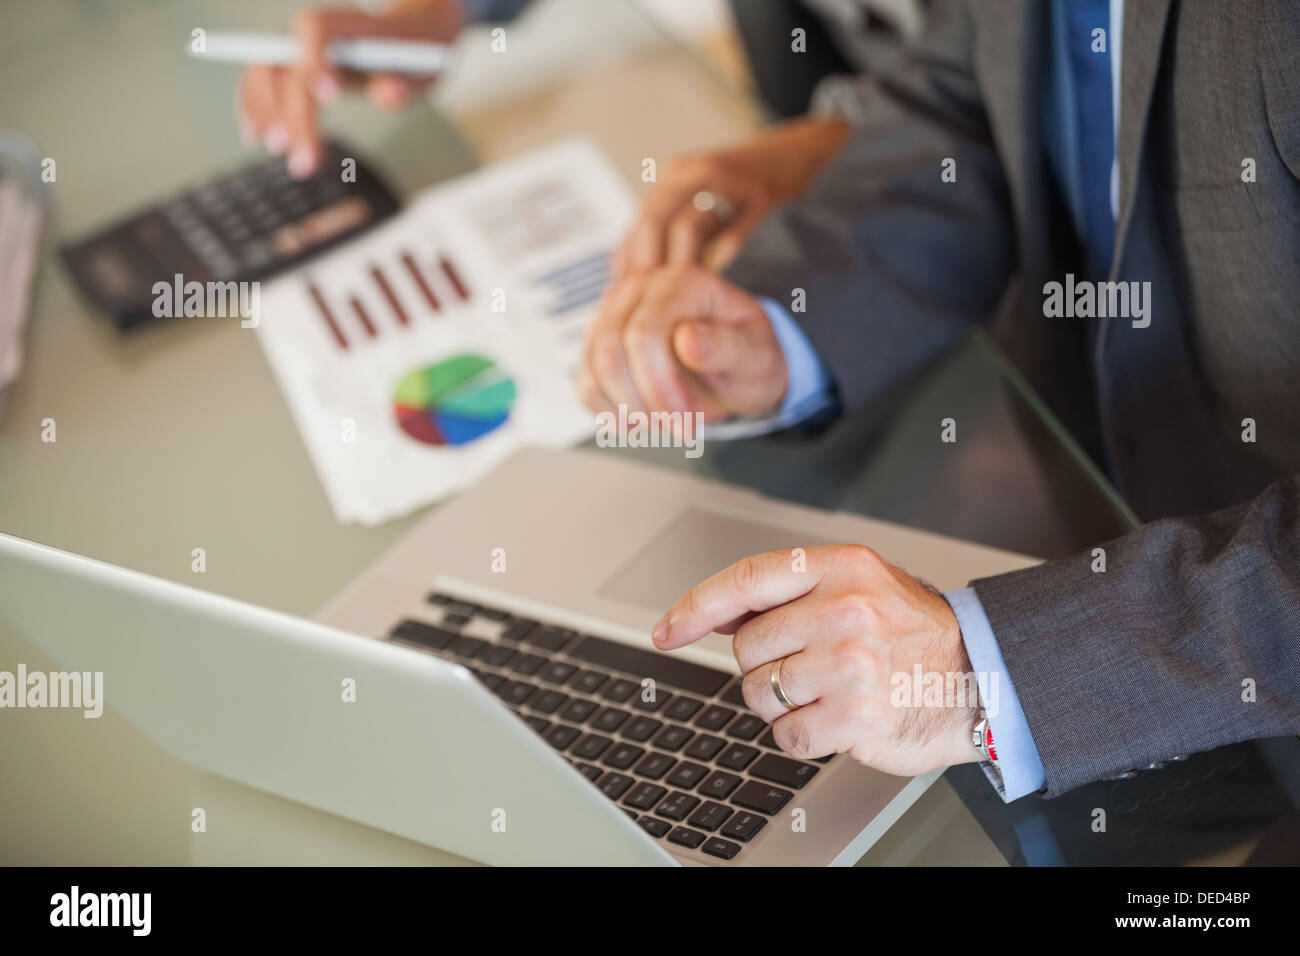 People in an office looking a laptop Stock Photo